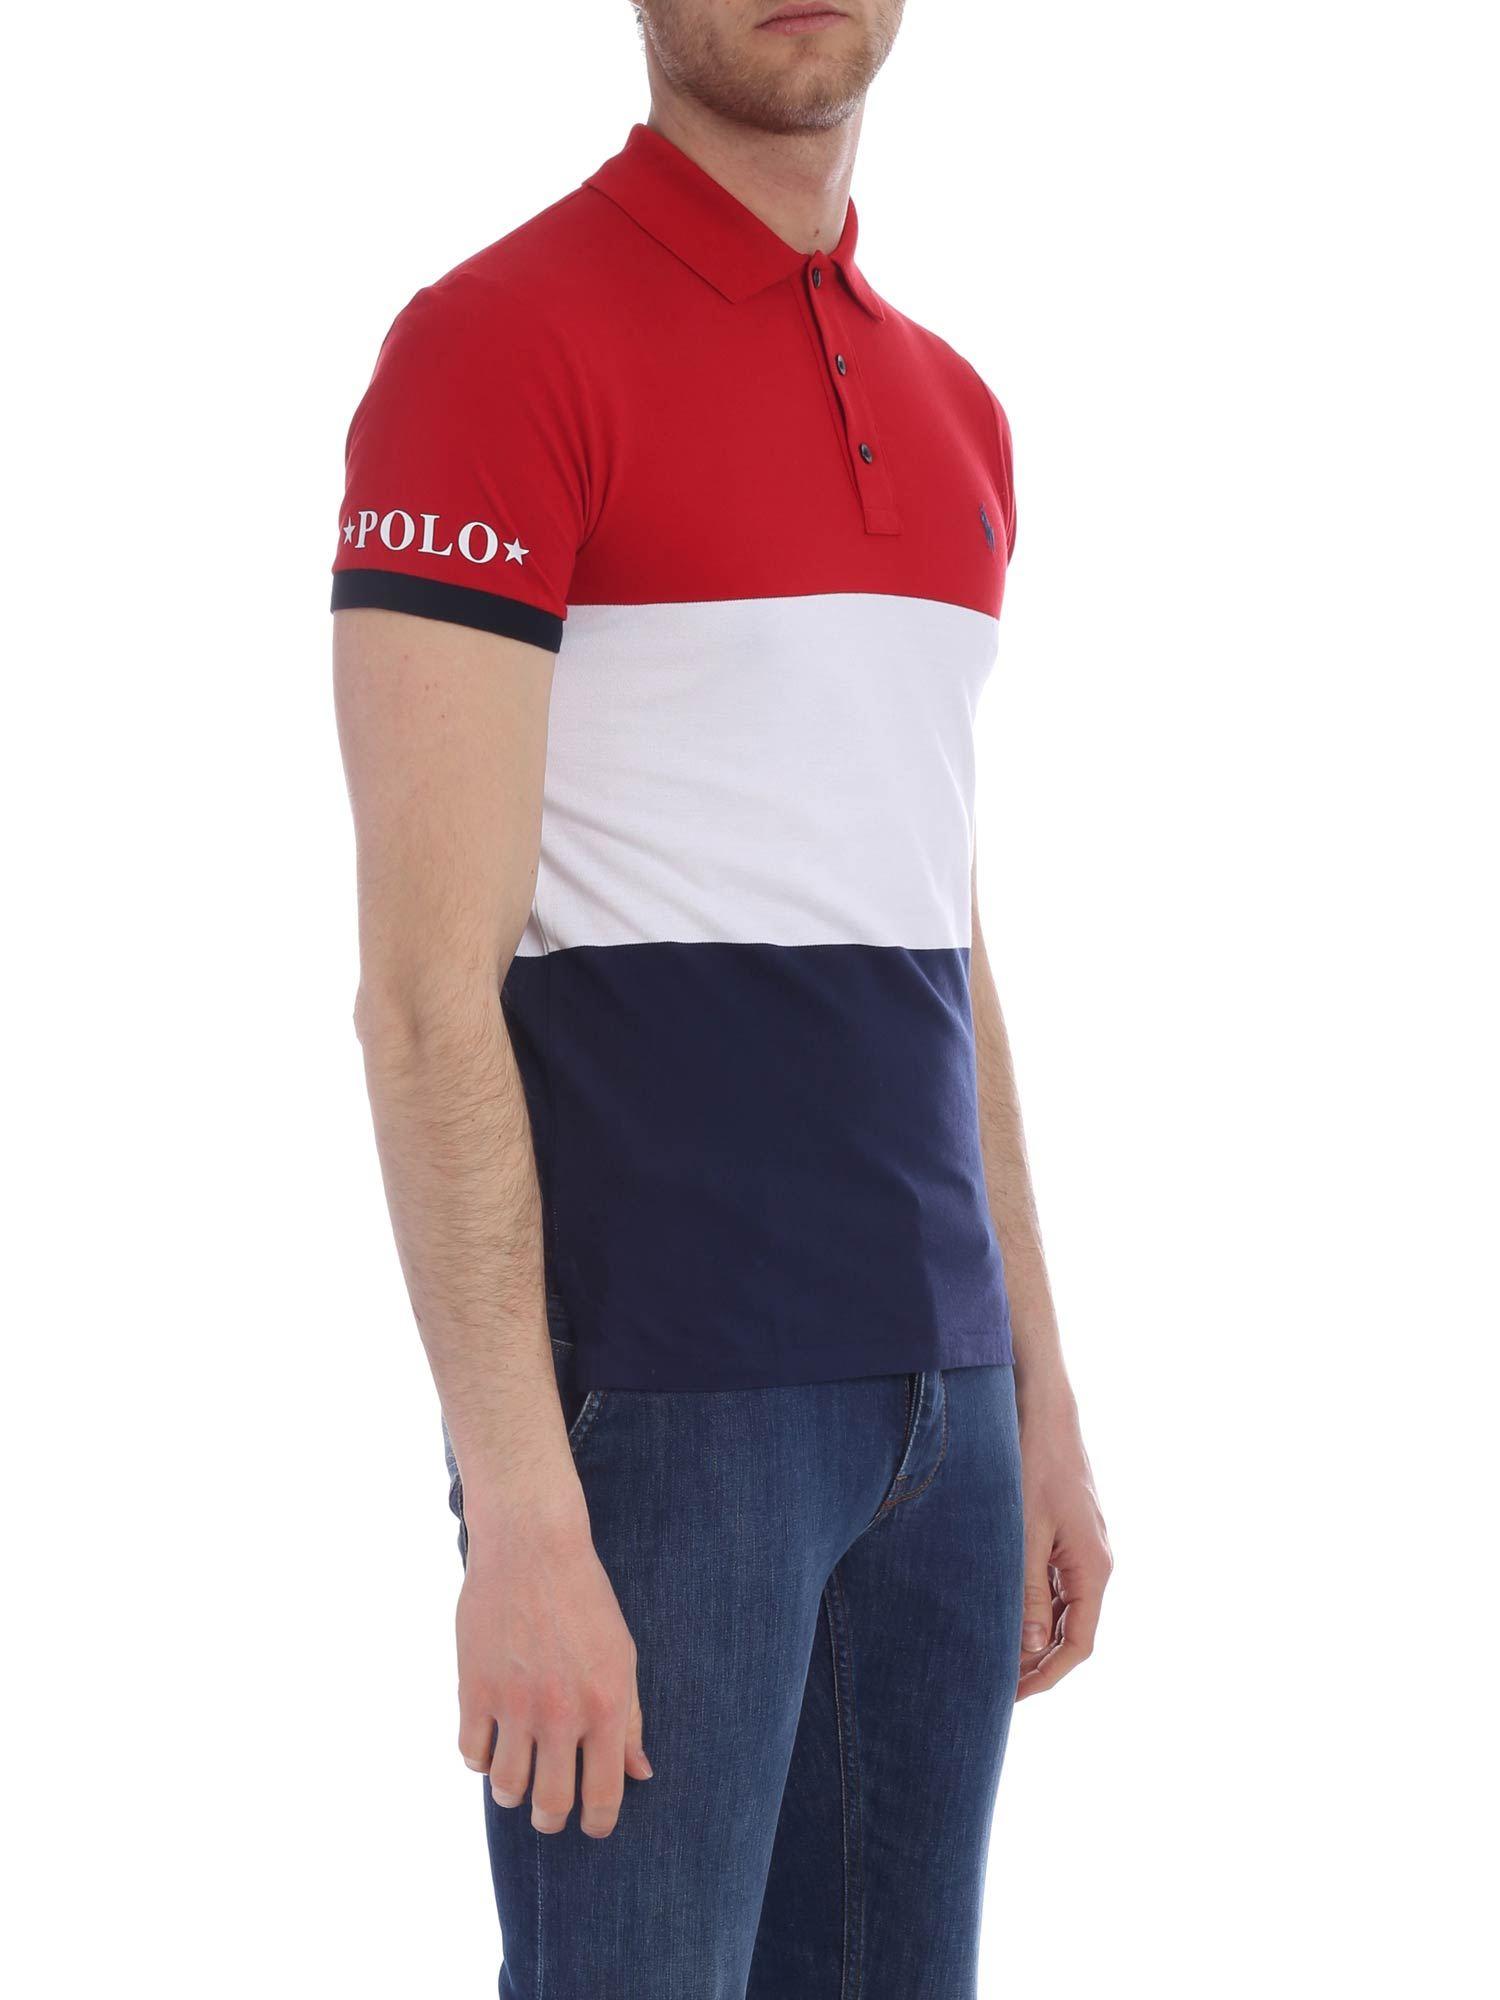 polo blue red and white